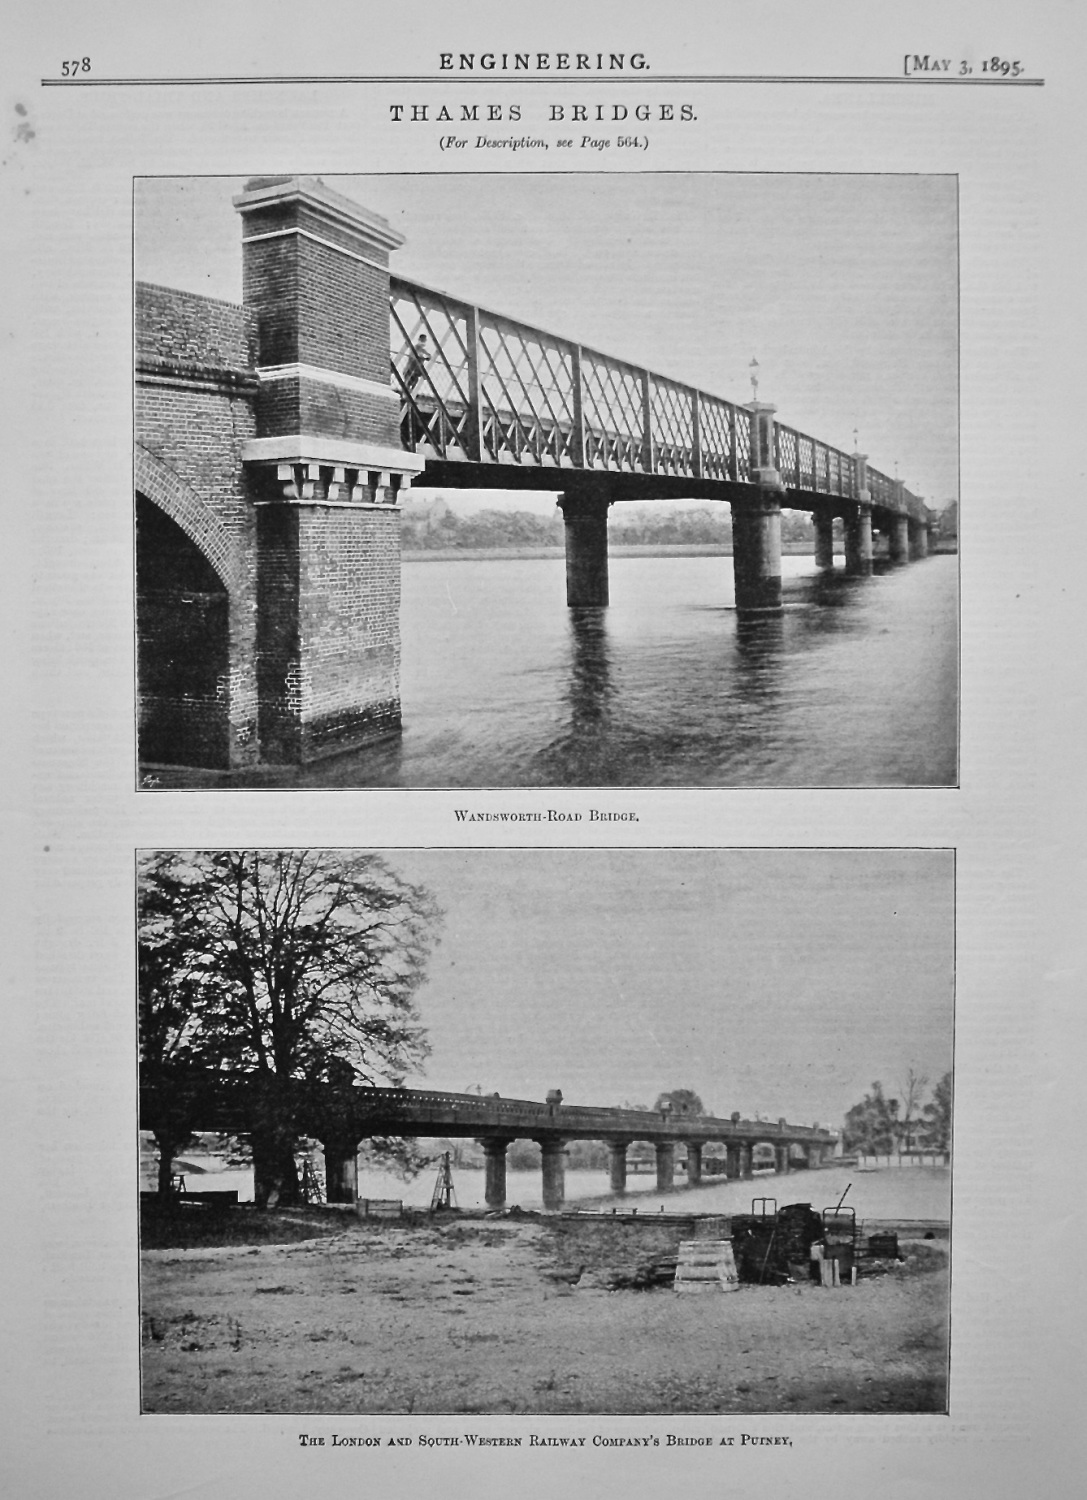 Thames Bridges : Wandsworth-Road Bridge, and The London and South-Western R